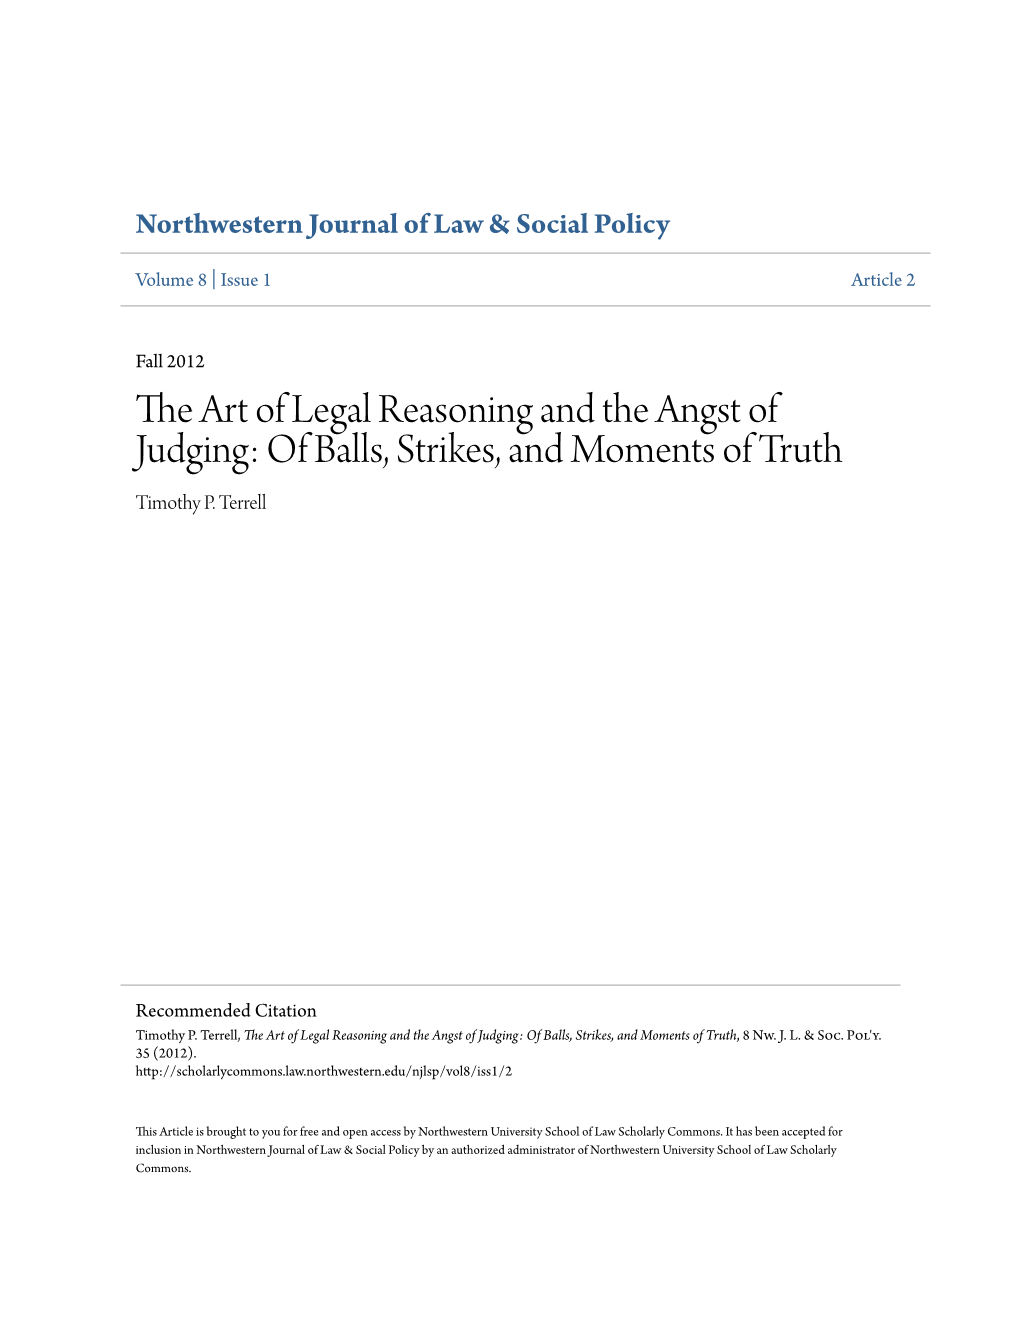 The Art of Legal Reasoning and the Angst of Judging: of Balls, Strikes, and Moments of Truth Timothy P